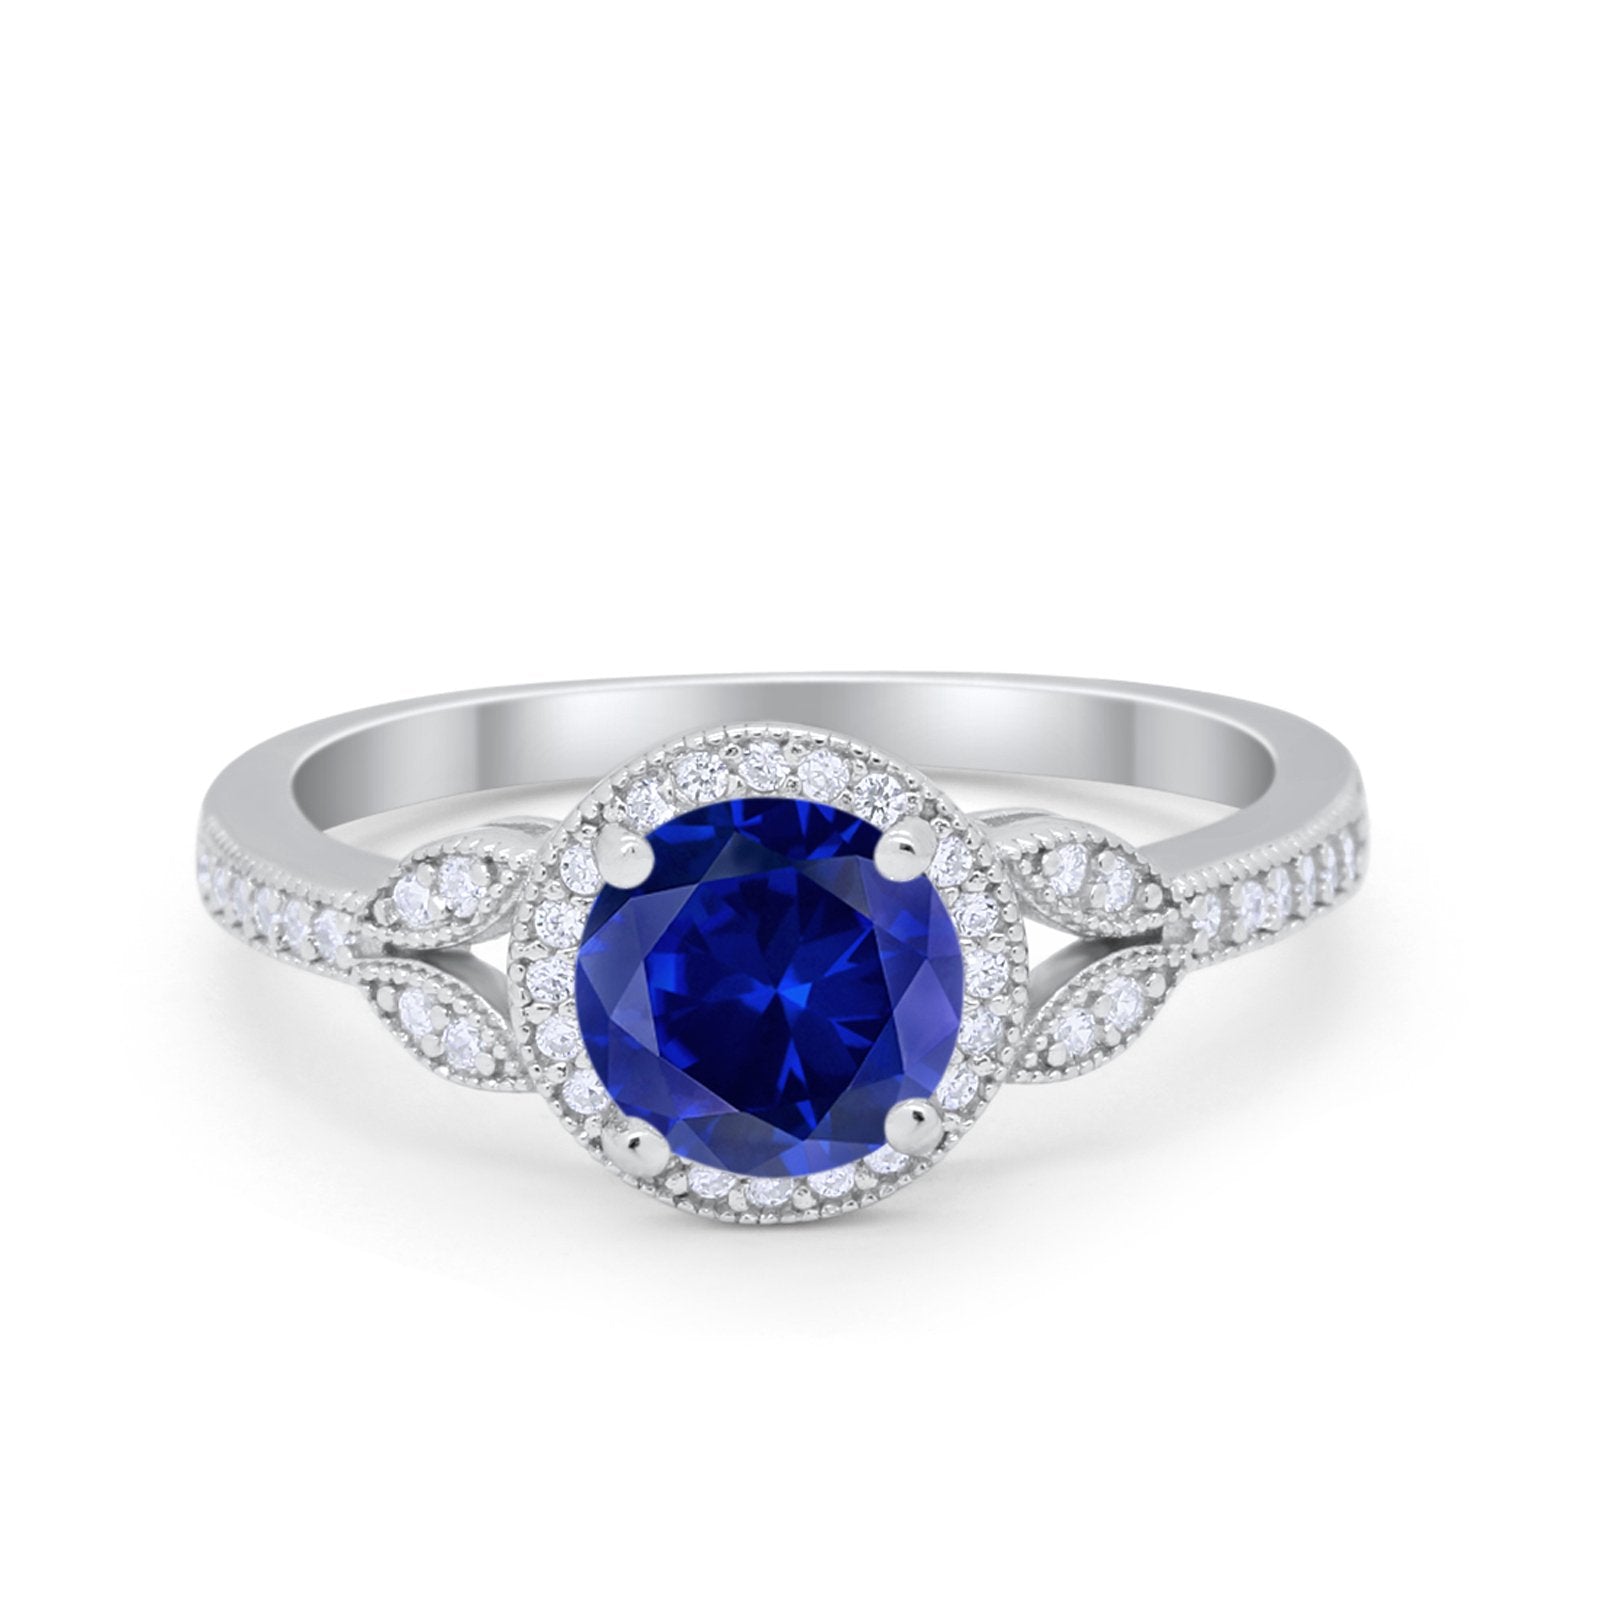 Art Deco Wedding Ring Halo Simulated Blue Sapphire CZ 925 Sterling Silver